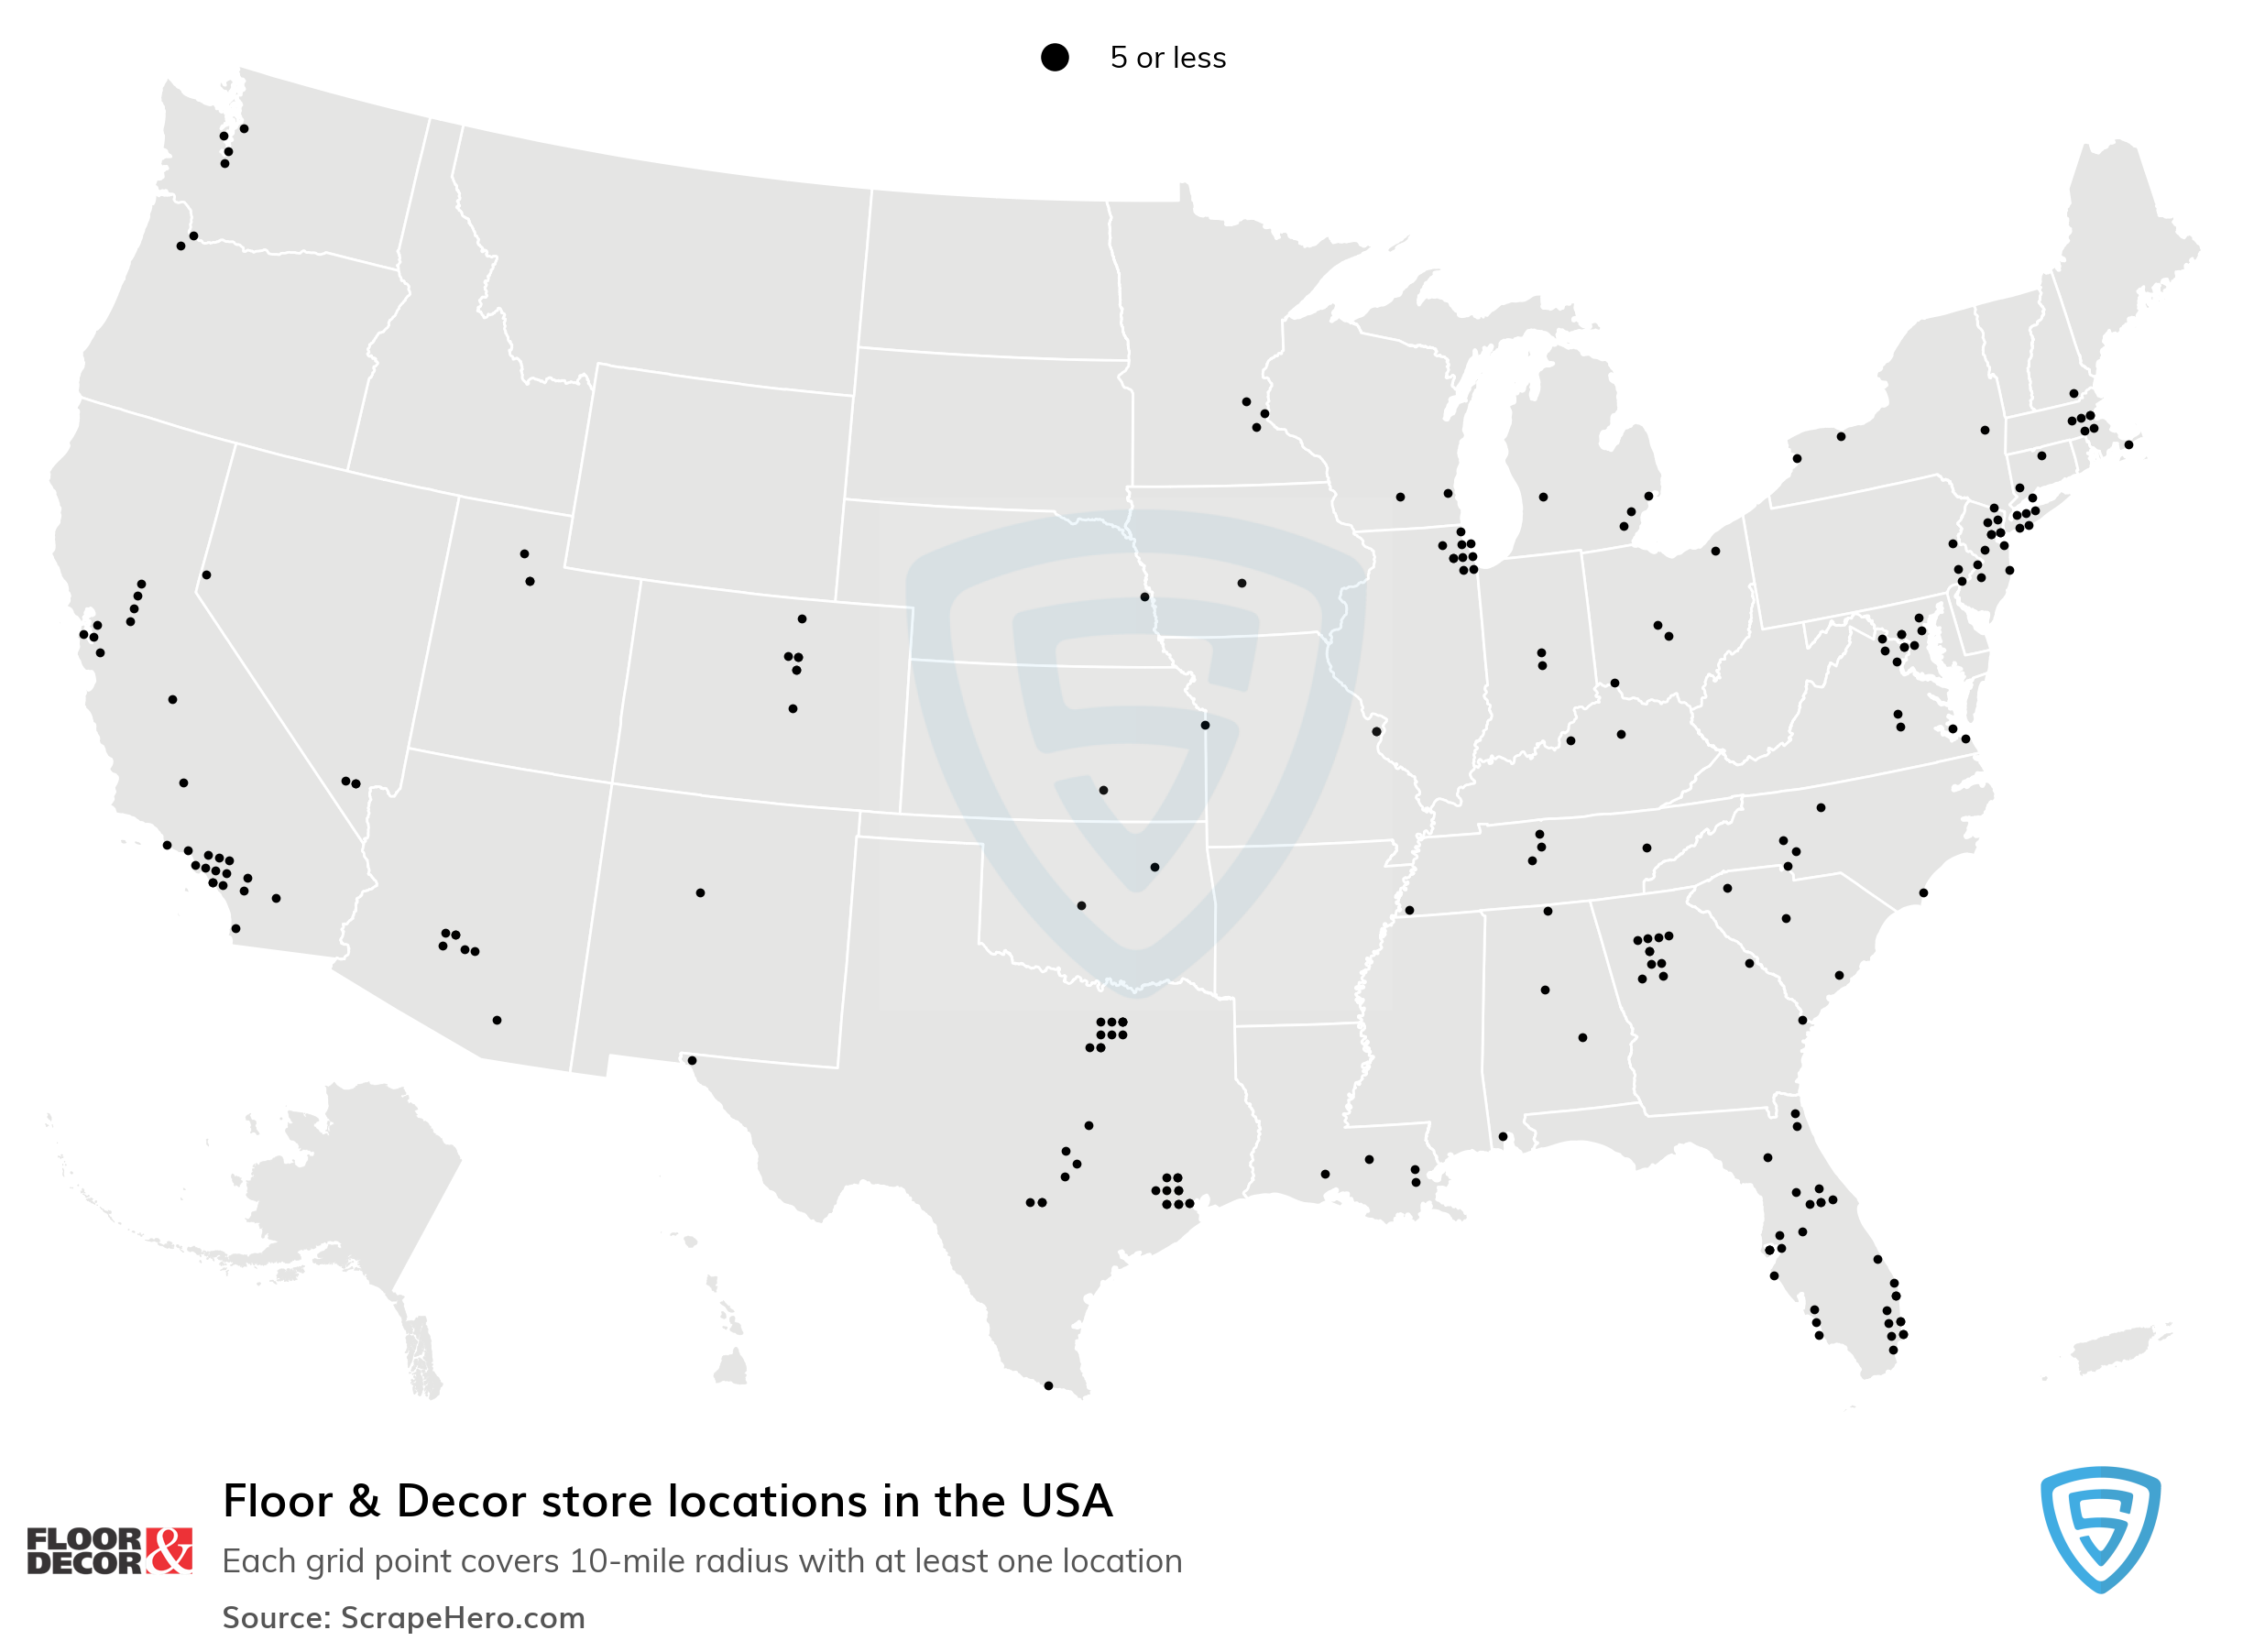 Number of Floor & Decor locations in the United States in 2021 | ScrapeHero